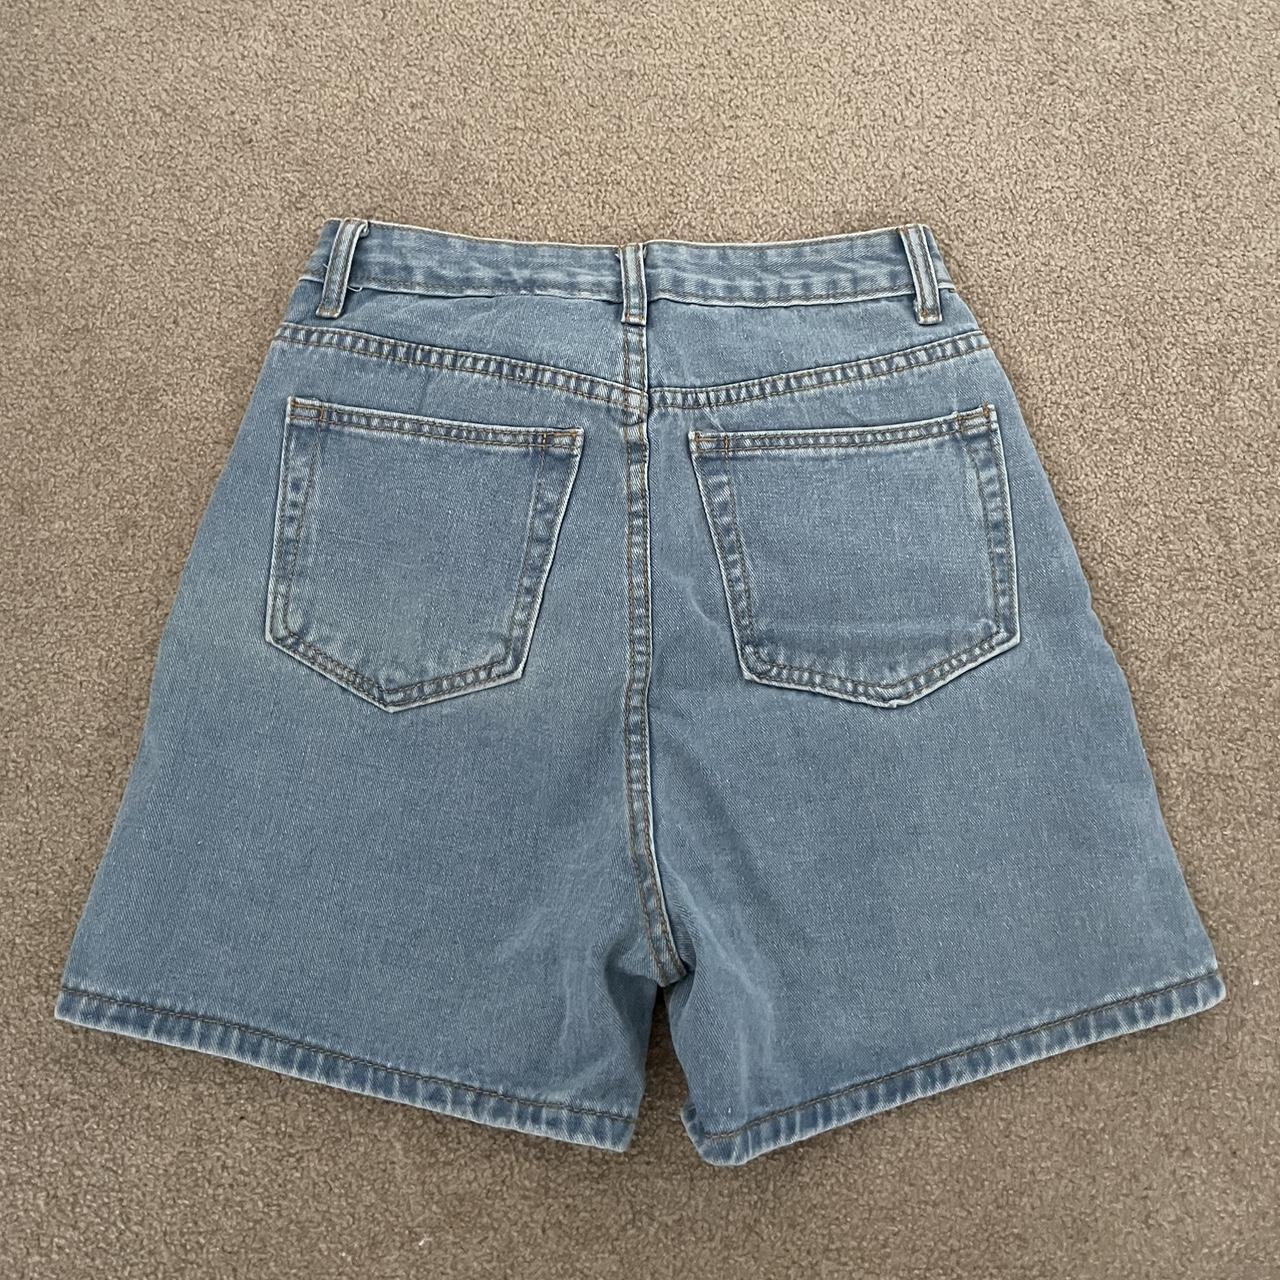 Long denim shorts Never worn before, gifted and not... - Depop